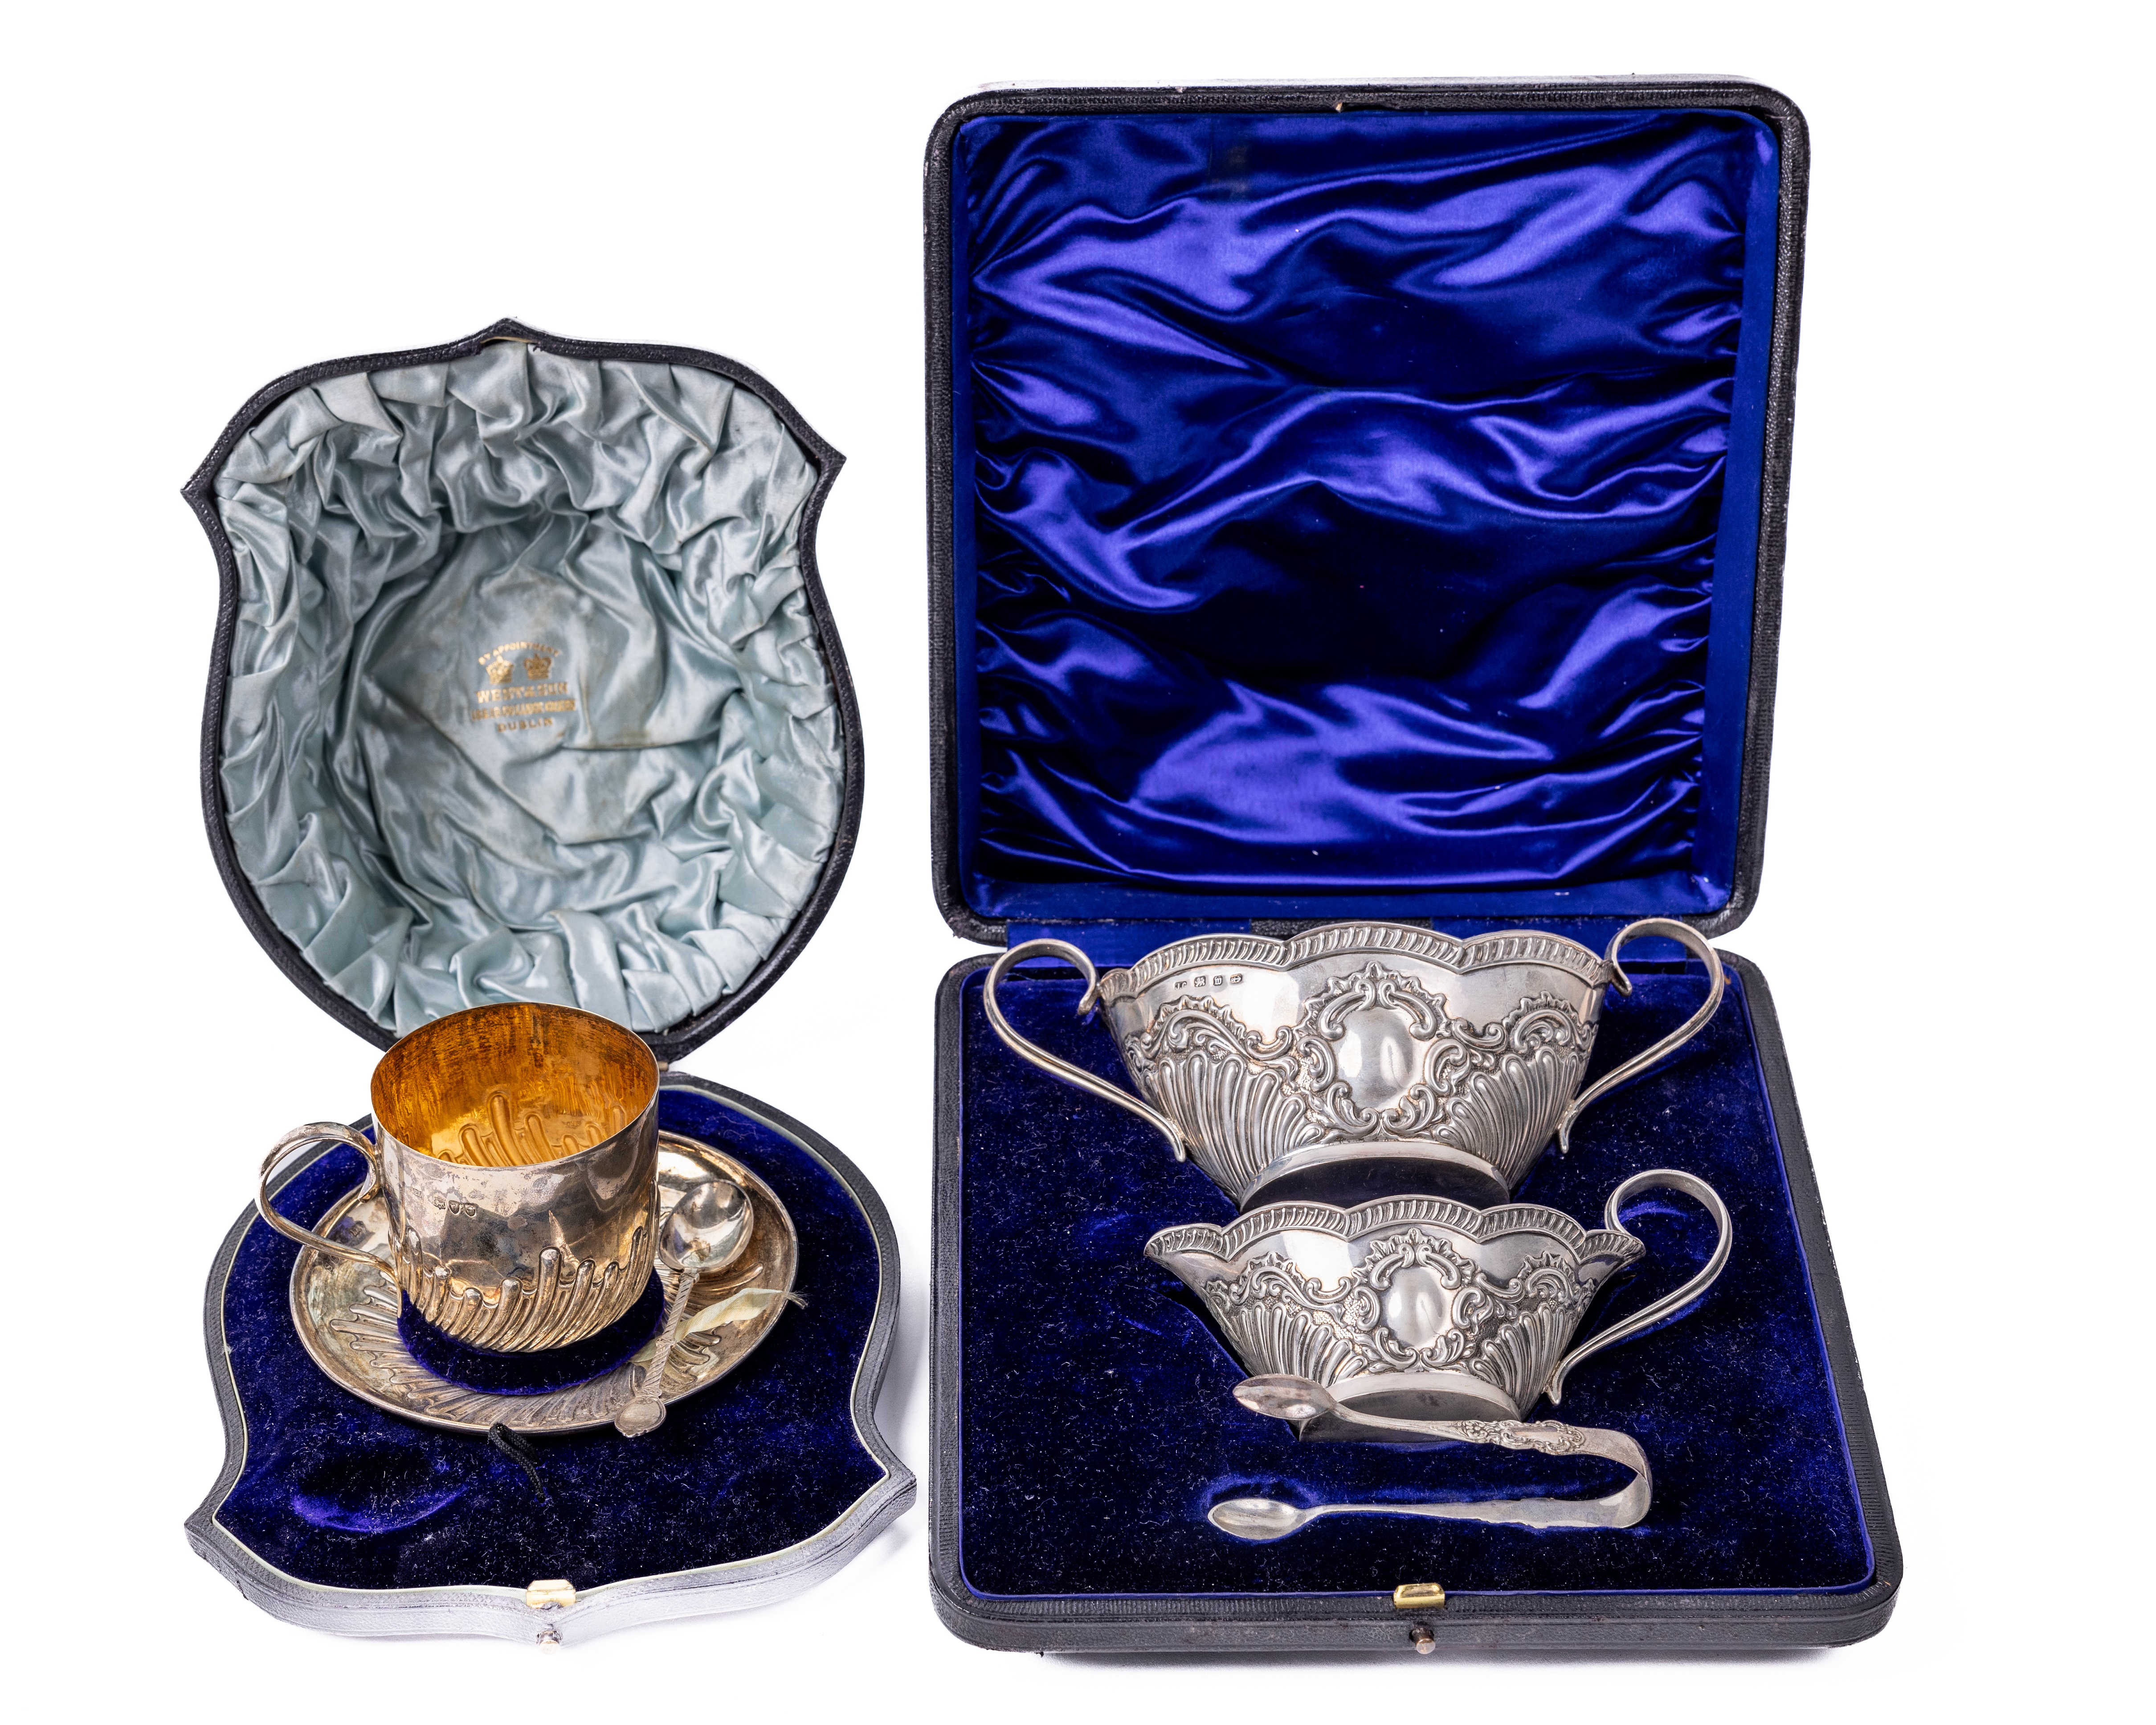 A cased English silver Christening Cup and Saucer, and Spoon, by E.H. (Wm. Hutton & Sons) retailed